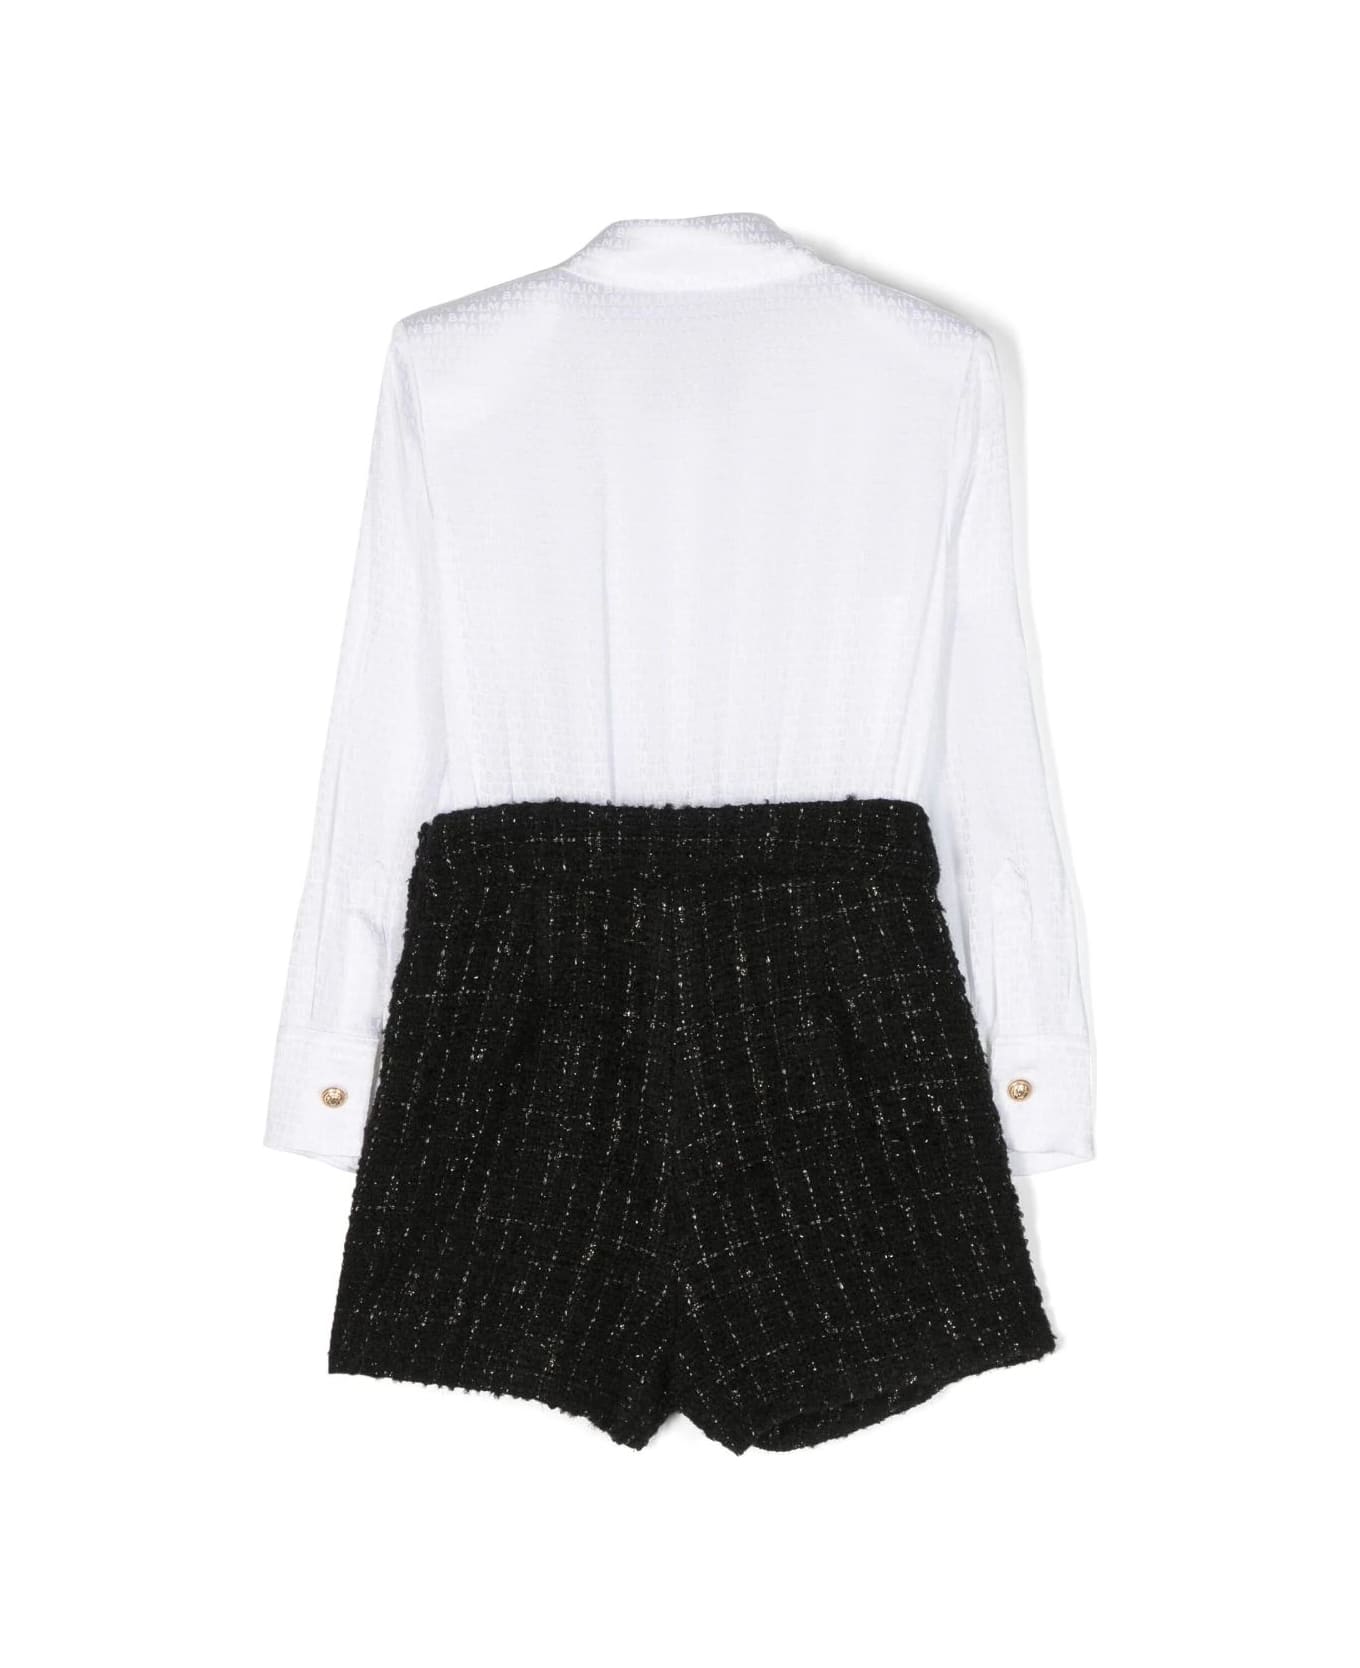 Balmain Black And White Cotton And Tweed Jumpsuit - White/black